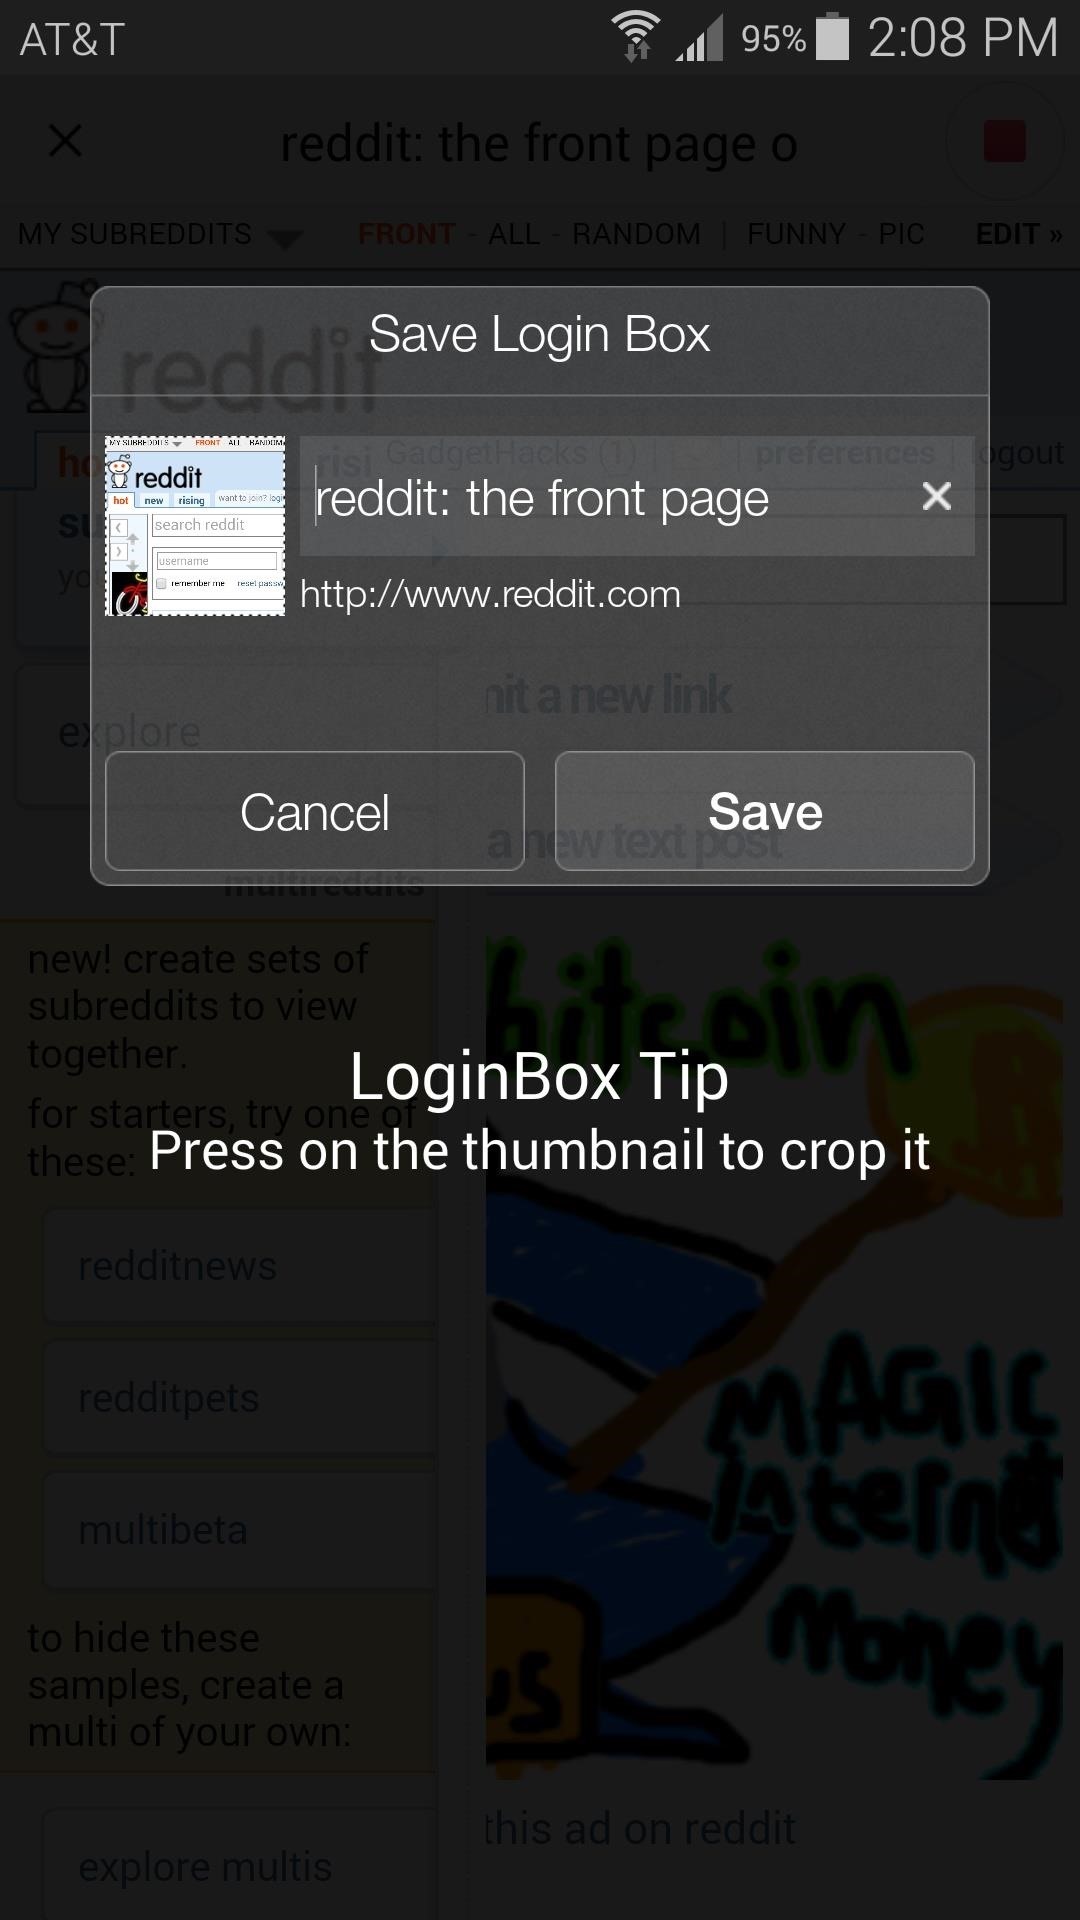 One-Tap, Hassle-Free Logins: Automate the Sign-In Process for Your Favorite Websites on Android